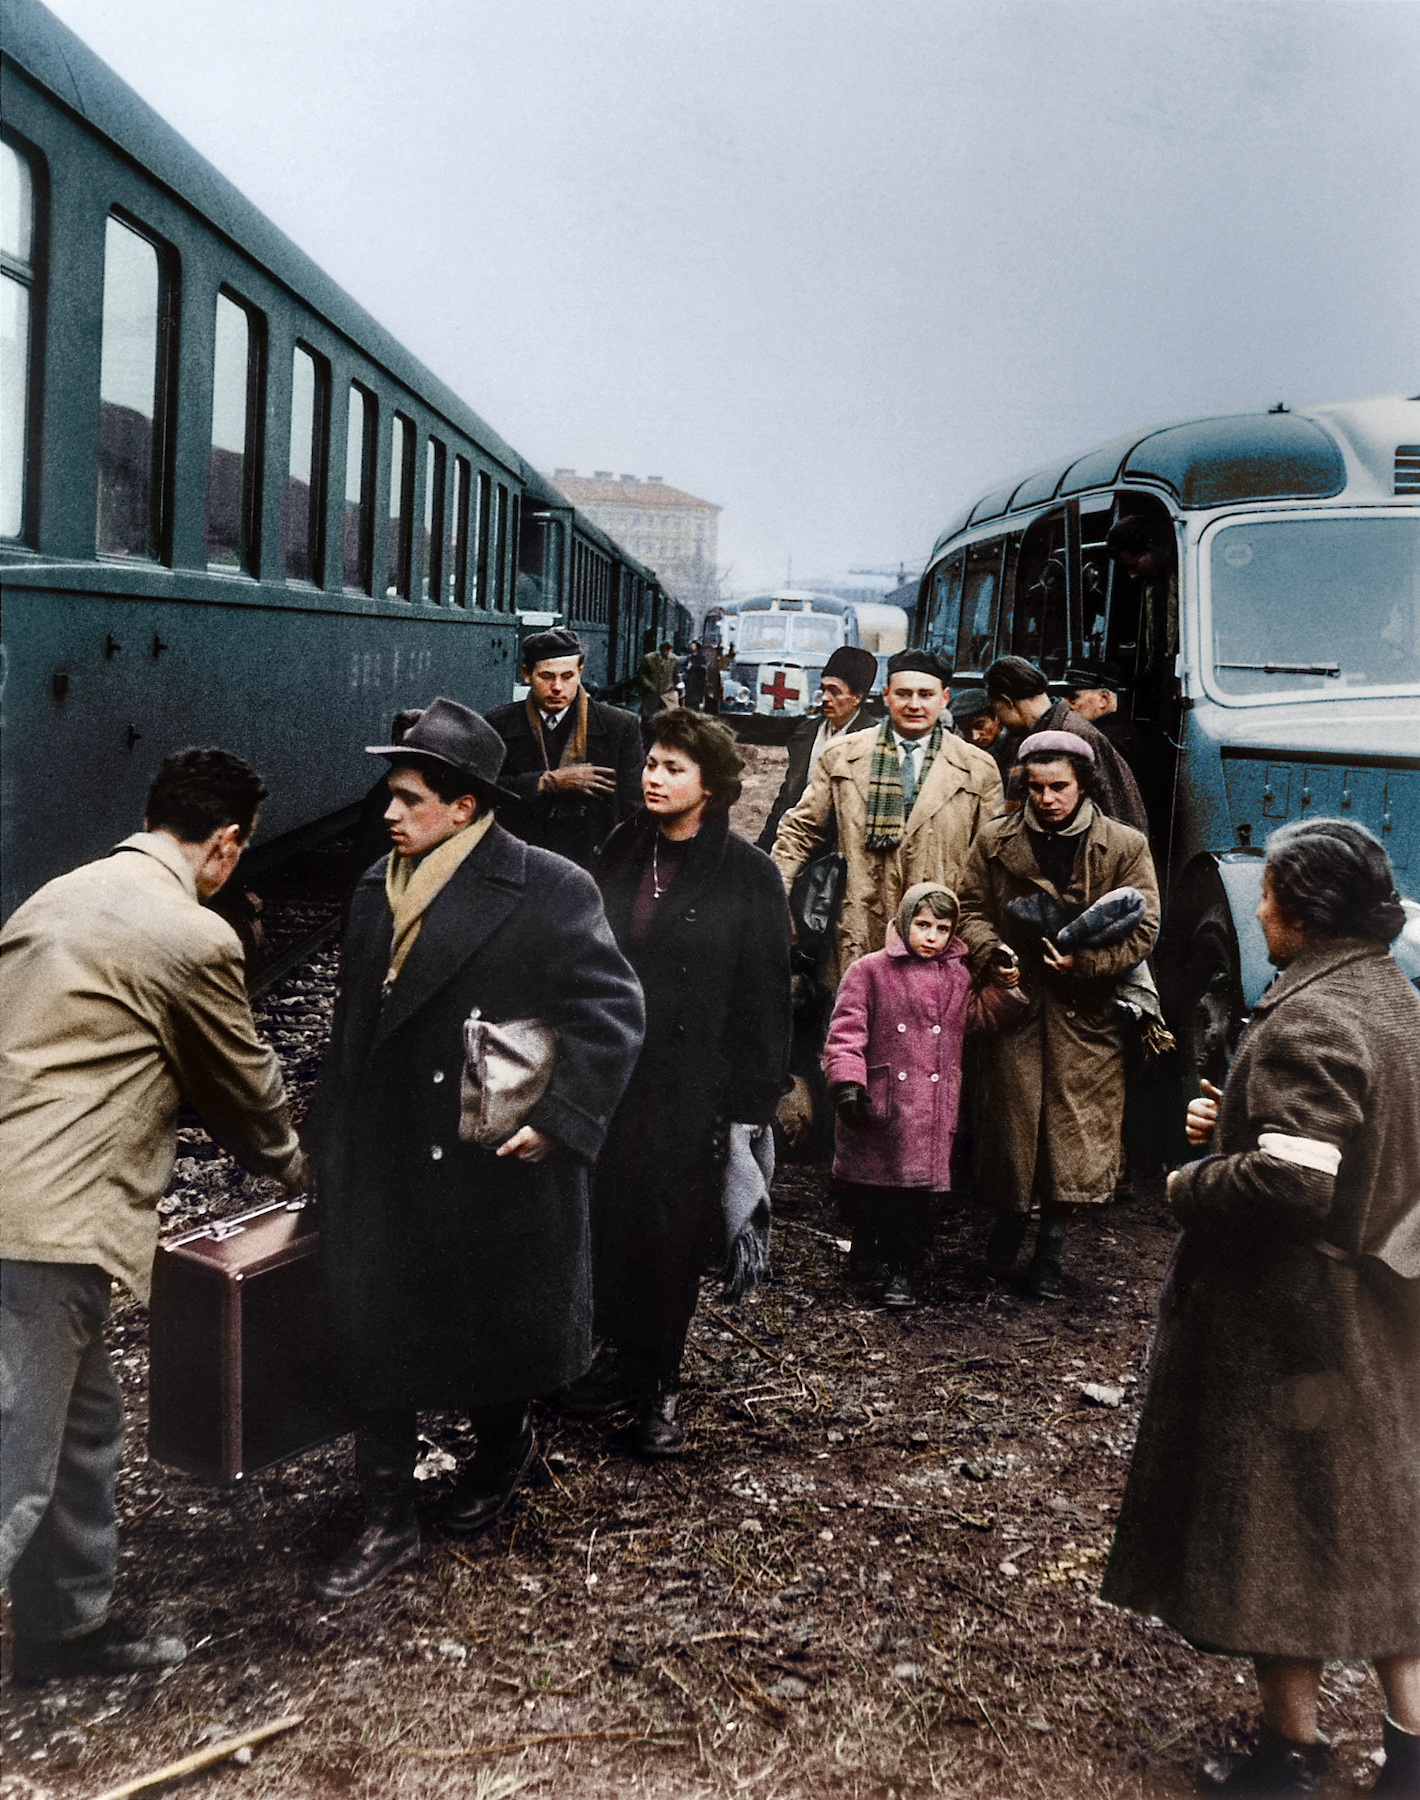 Hungarian refugees taking a train to Switzerland, 1956. Colorized picture